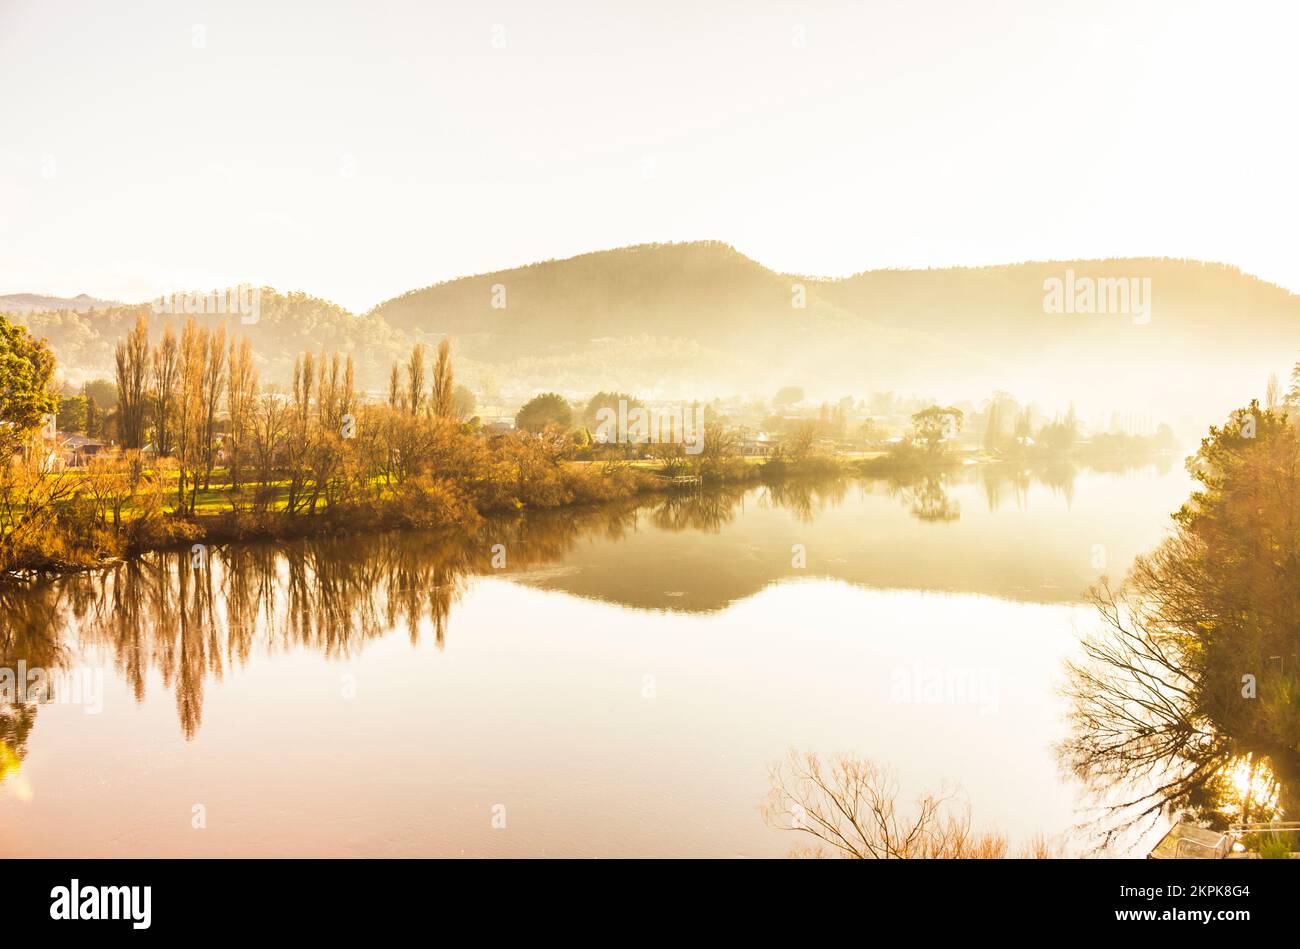 Beauty in Tasmania captured in a landscape of early tranquillity with river views and morning fog. Derwent River, New Norfolk, Australia Stock Photo